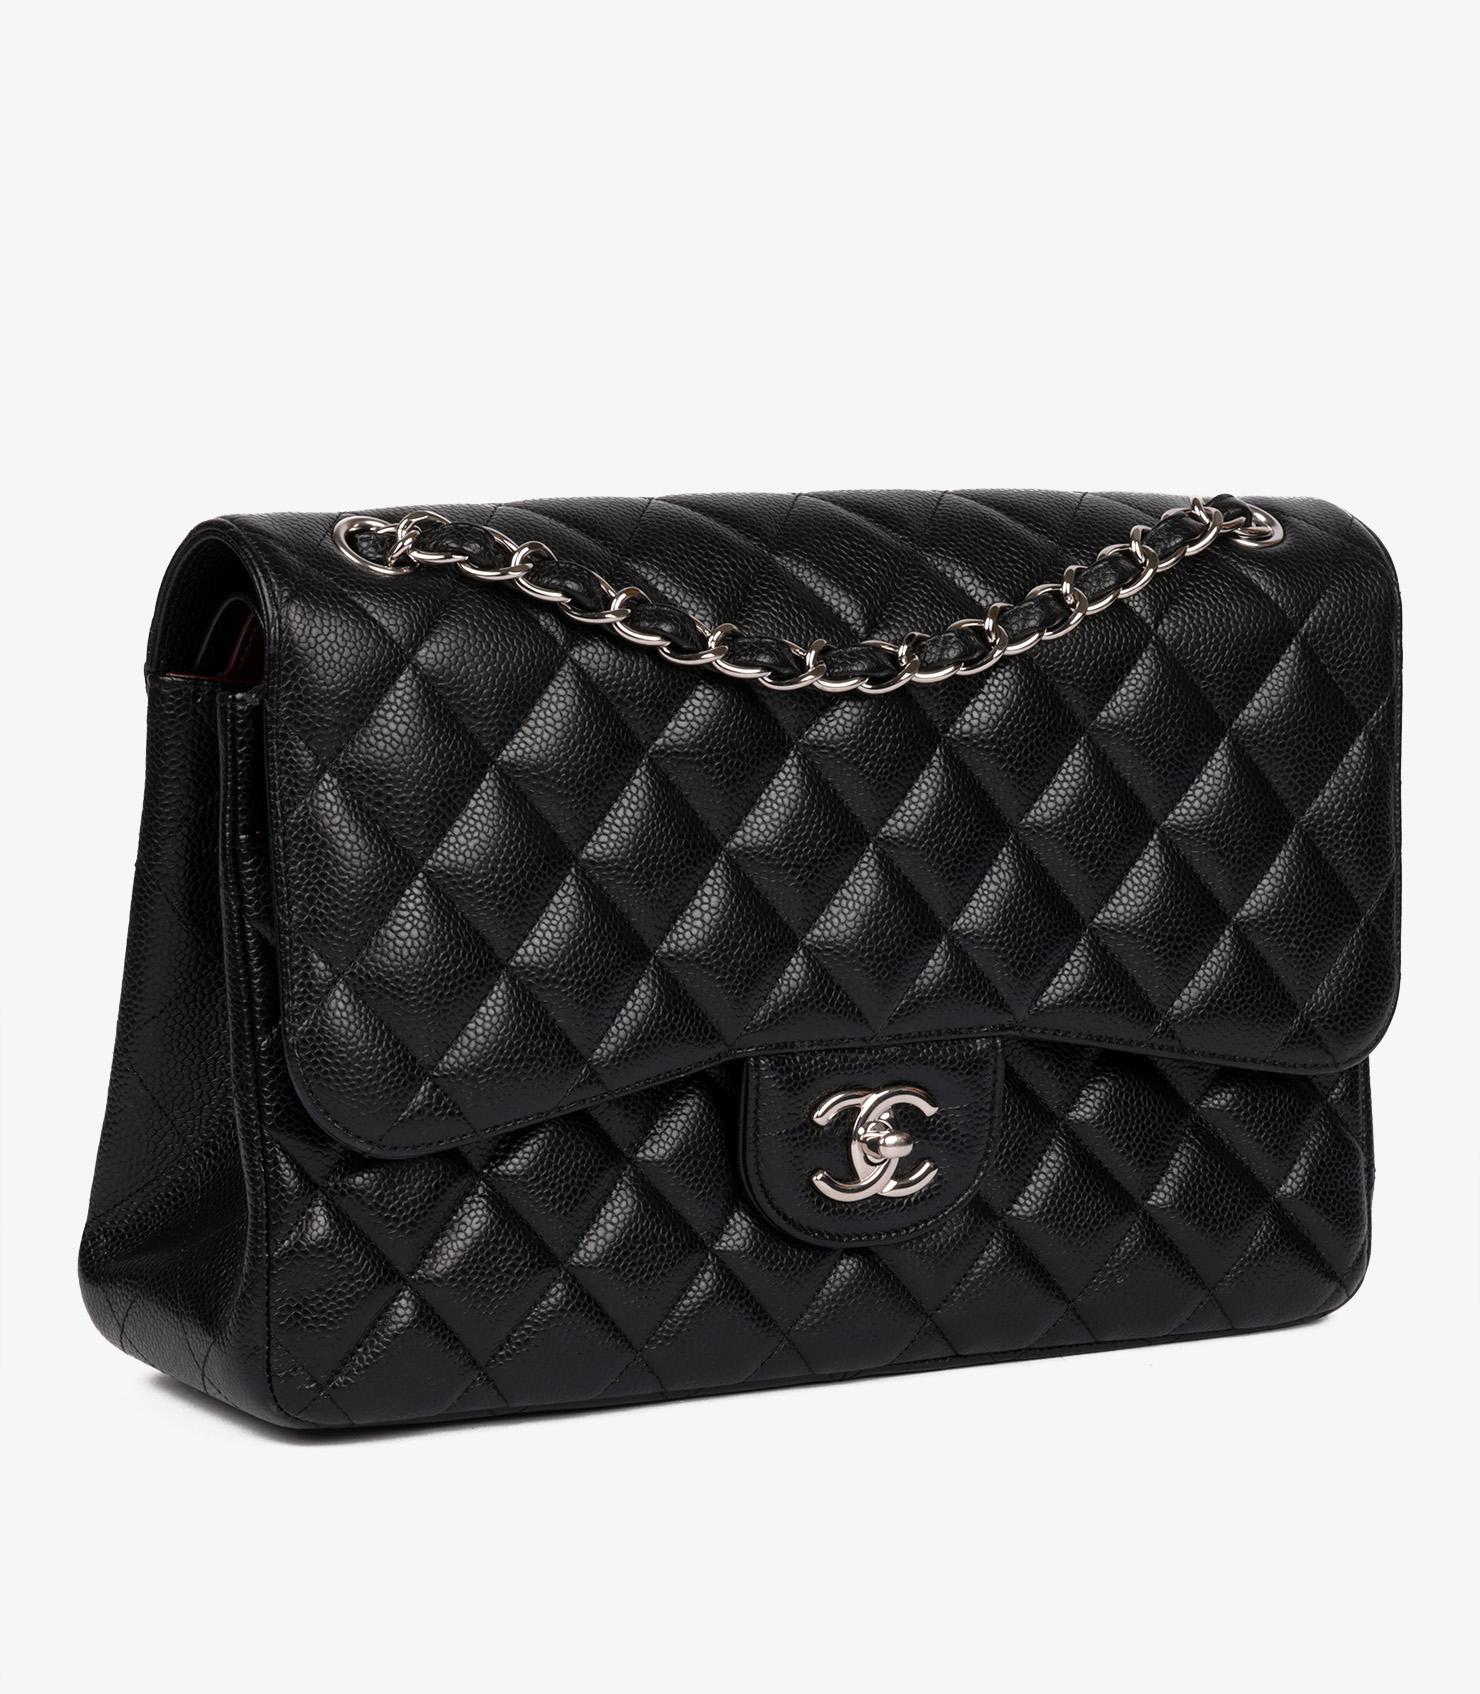 Chanel Black Quilted Caviar Leather Jumbo Classic Double Flap Bag

Brand- Chanel
Model- Jumbo Classic Double Flap Bag
Product Type- Shoulder
Serial Number- 17******
Age- Circa 2013
Accompanied By- Chanel Dust Bag, Box, Authenticity Card, Care